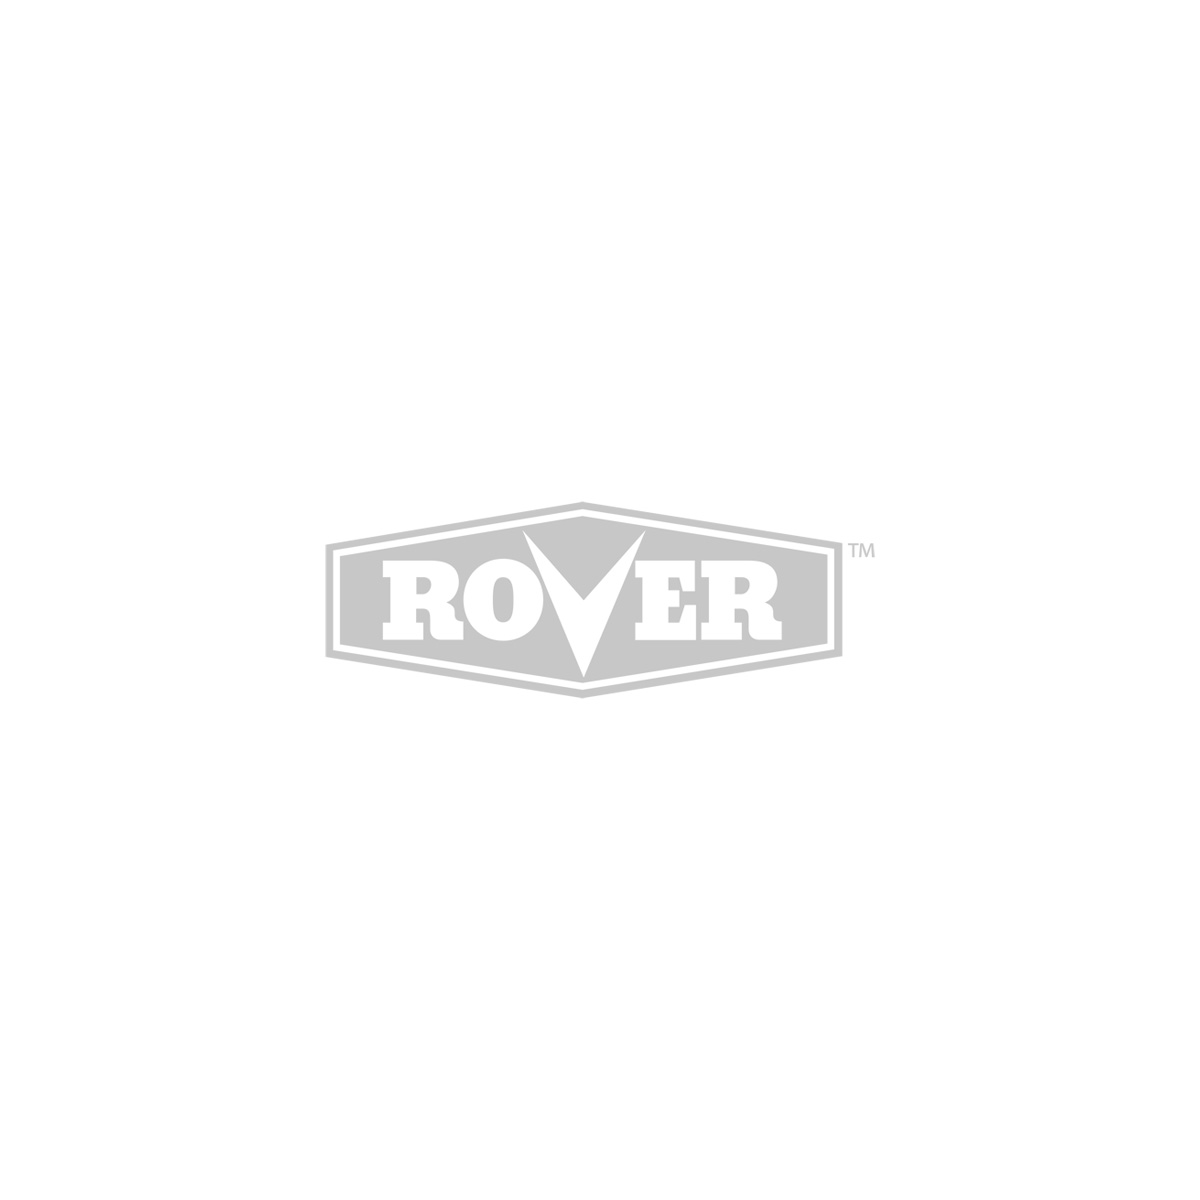 Rover ohv 910 engine manual